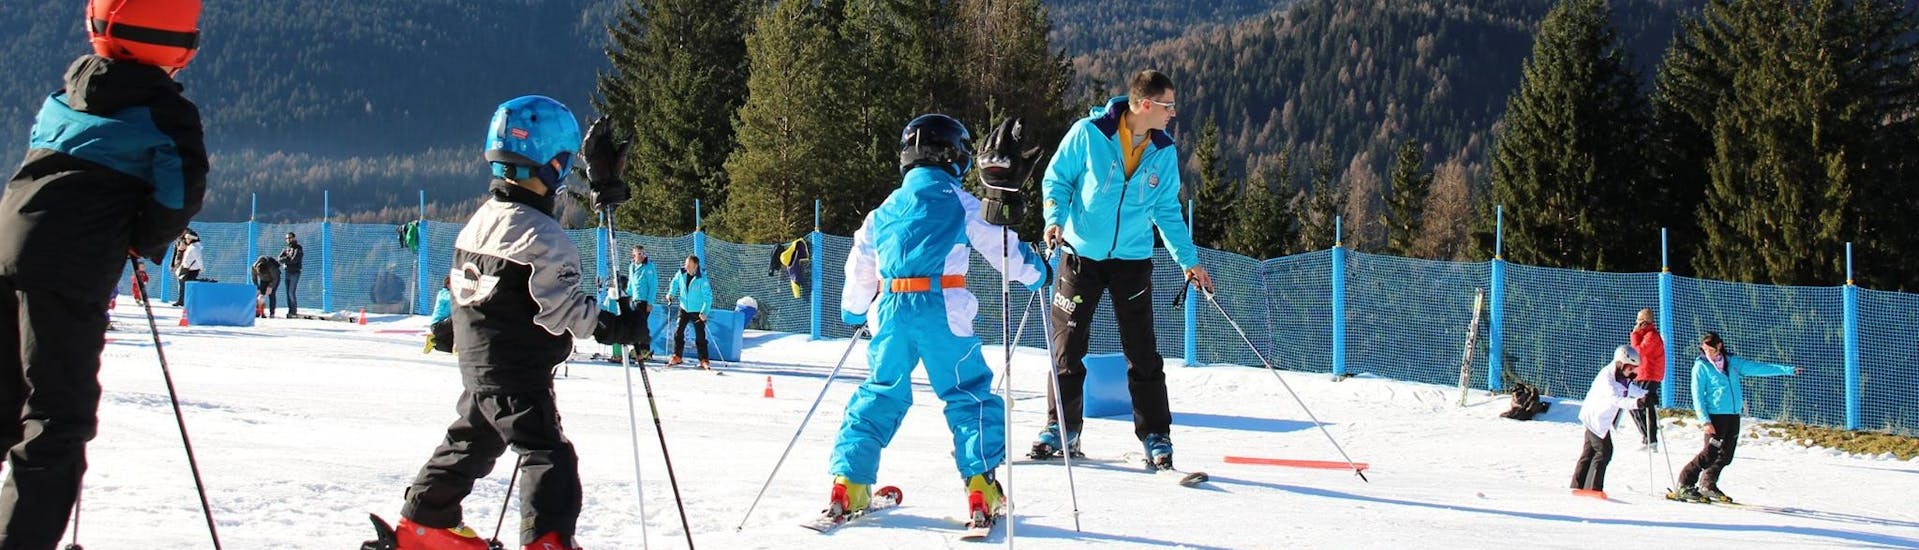 Kids skiing during the Kids Ski Lessons (5-13 y.) for Experienced Skiers  with  Scuola Sci Antelao San Vito di Cadore.